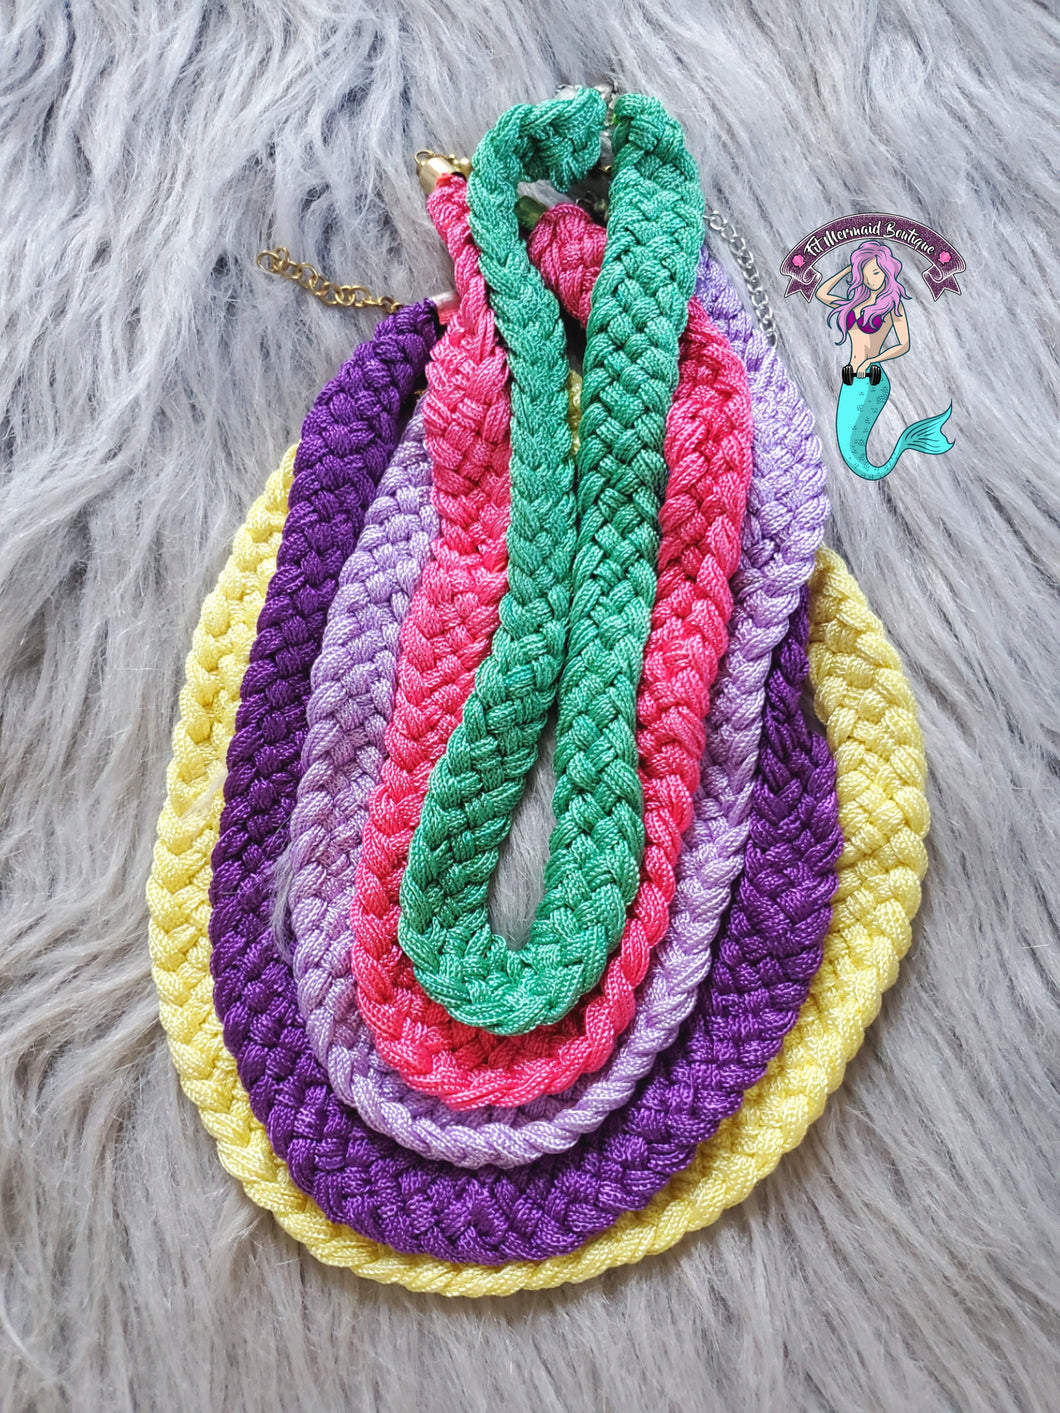 Colorful braided necklaces